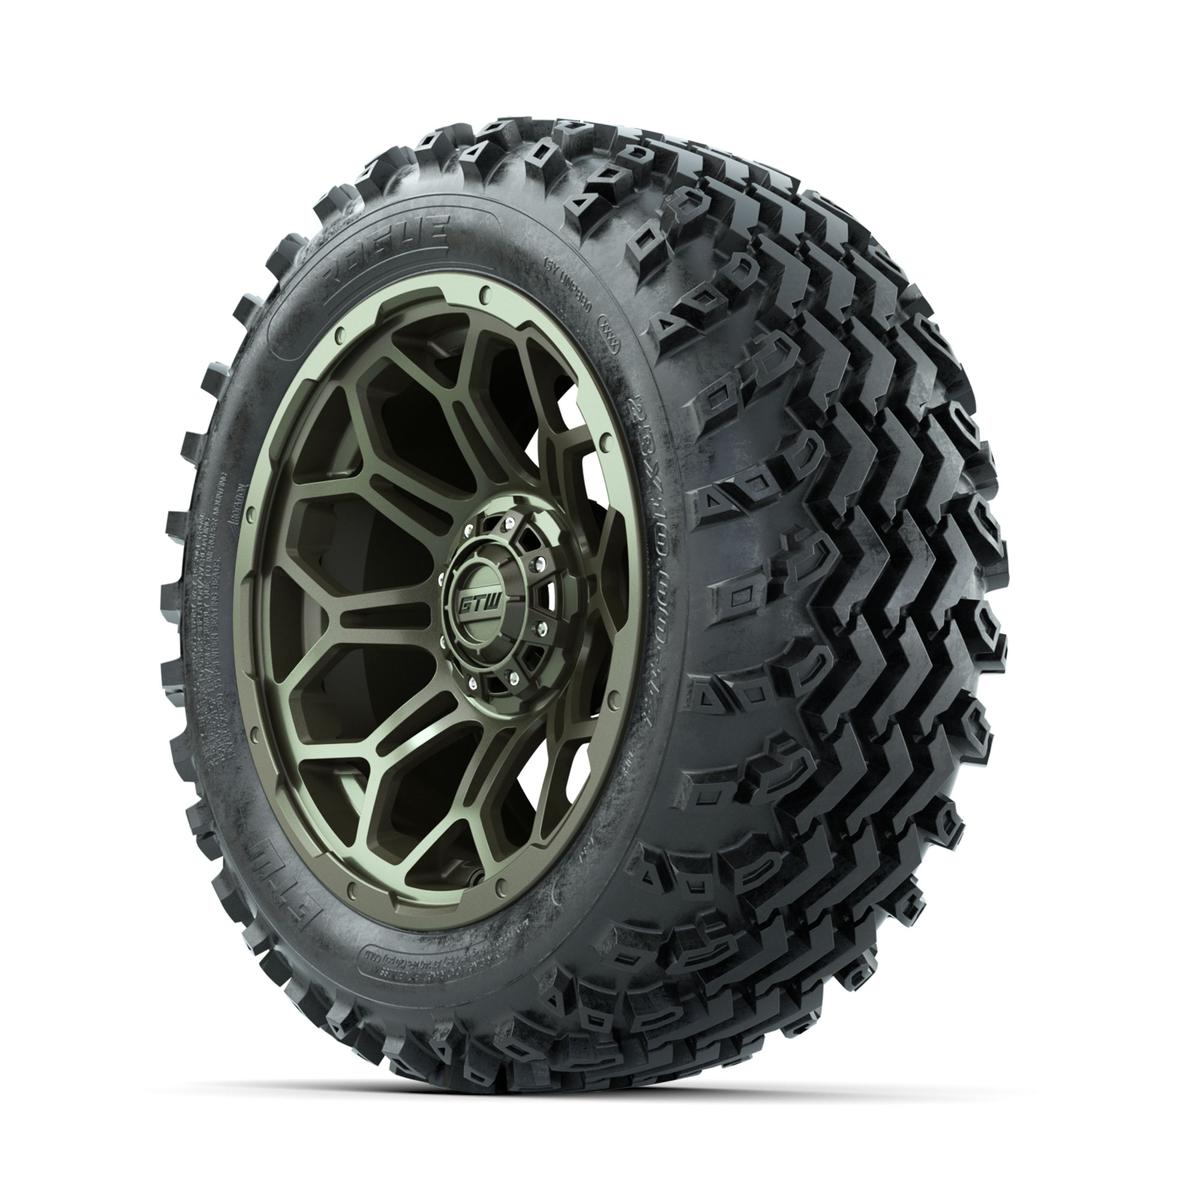 GTW Bravo Matte Recon Green 14 in Wheels with 23x10.00-14 Rogue All Terrain Tires – Full Set